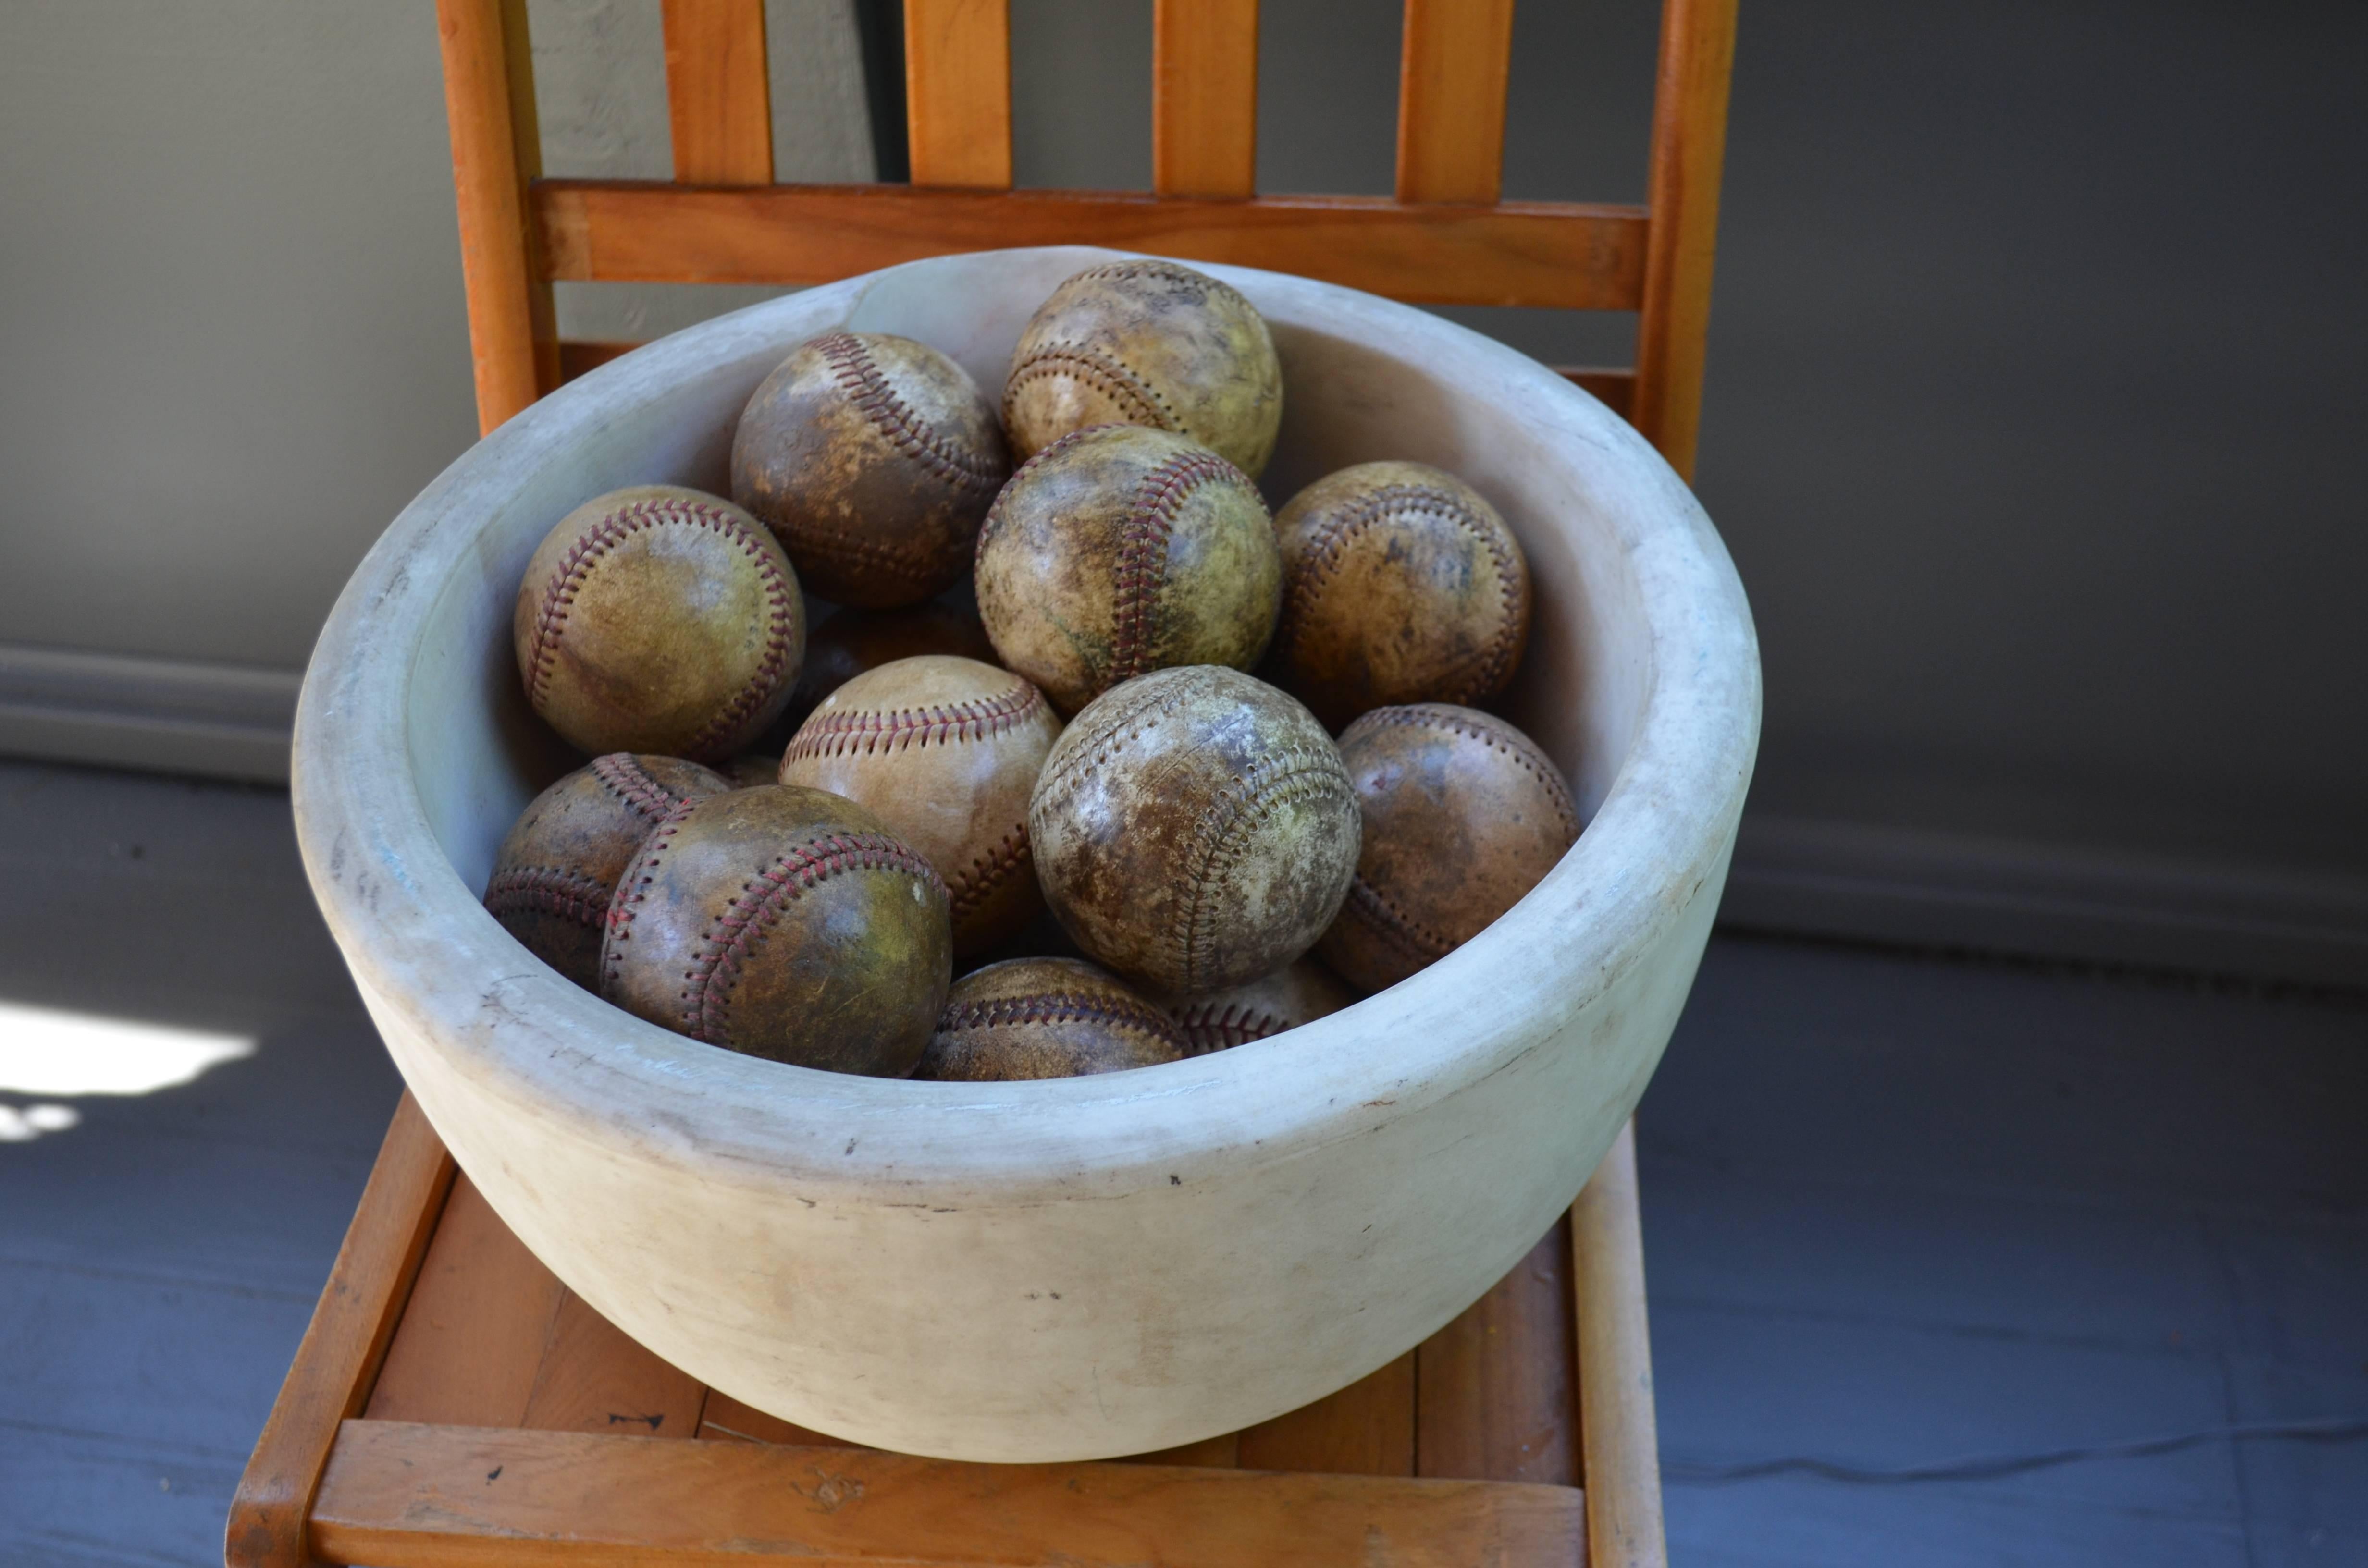 The large-sized antique mortar bowl was found this way home to a group of 18 well-loved, 1960s-era baseballs and so they remain together to display as you see fit or put to further use. Batter up.